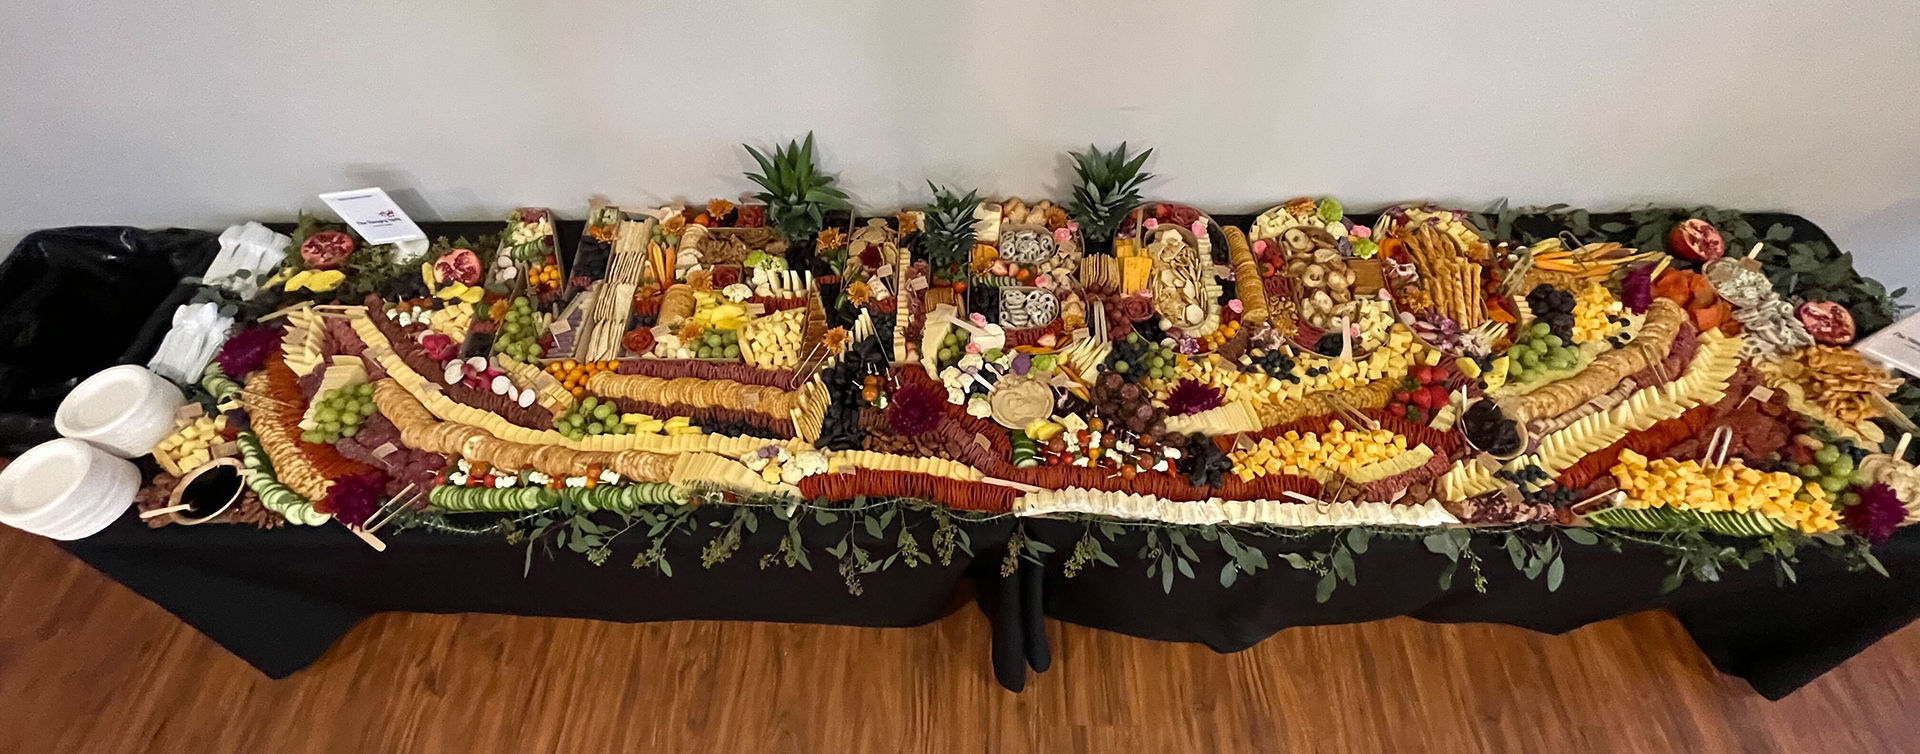 A spread of meat, cheese, vegetables, and crackers prepared by The Hangry Lady